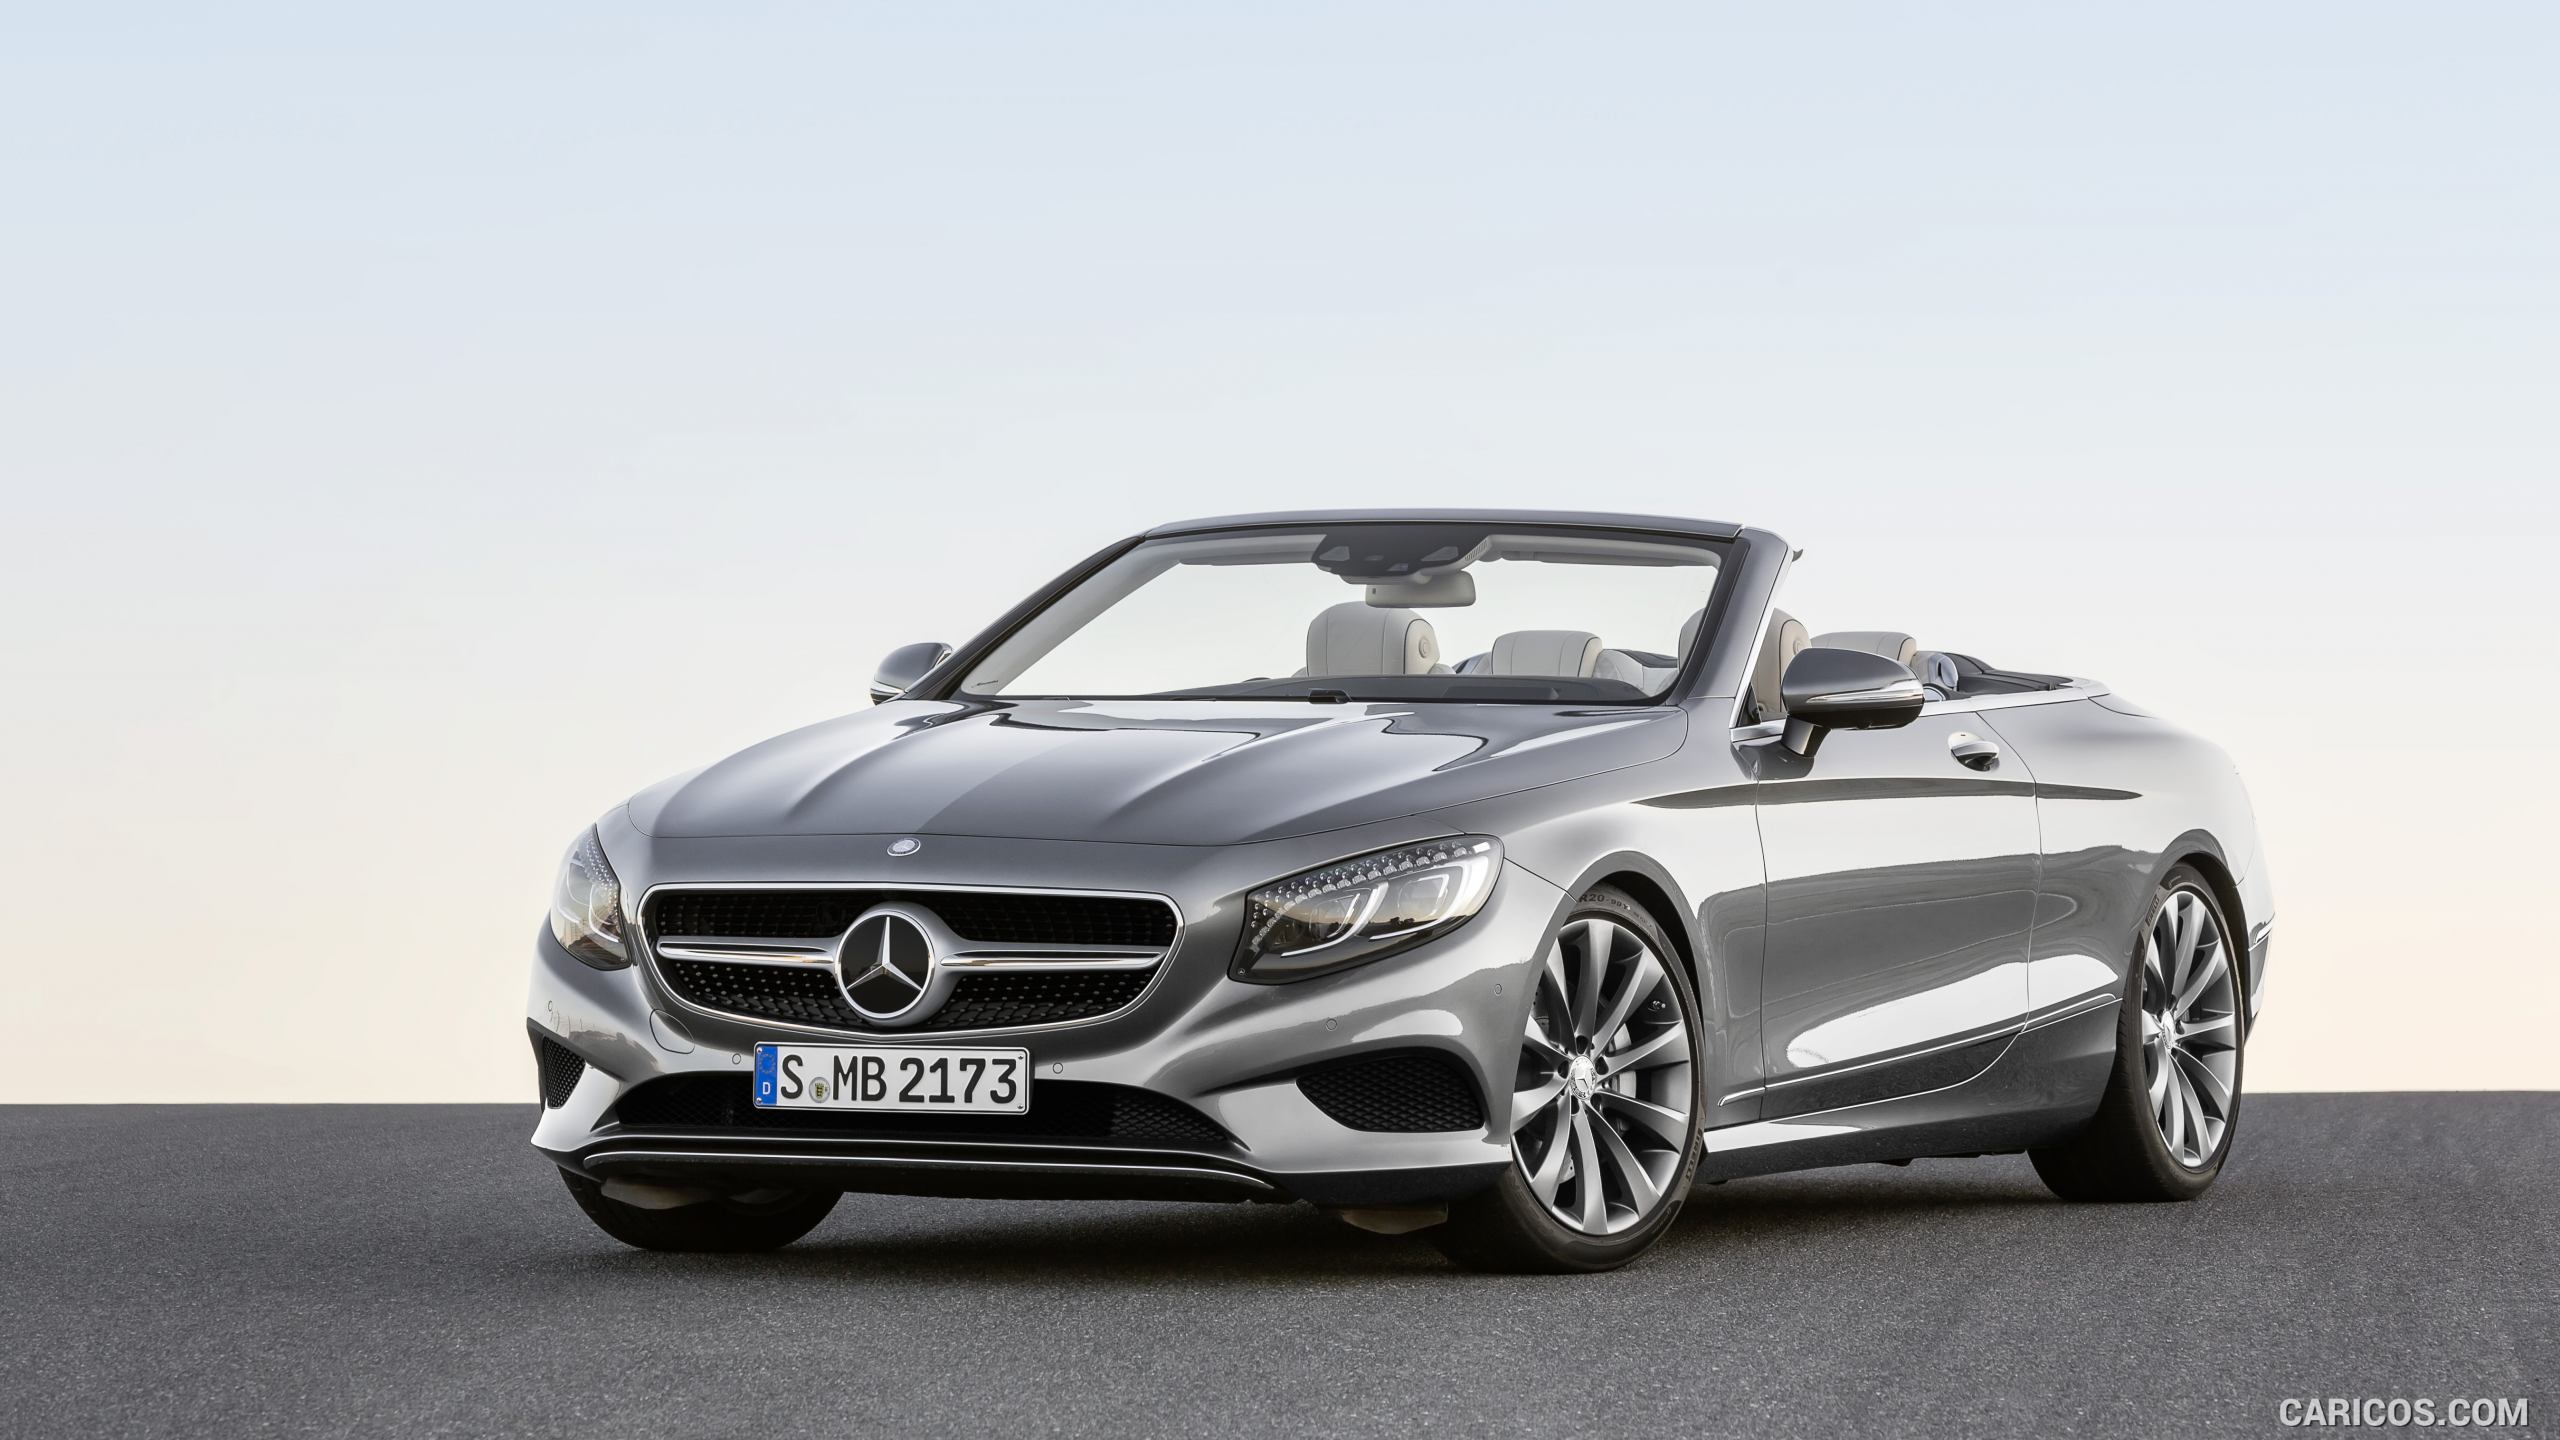 2017 Mercedes-Benz S-Class S500 Cabriolet (Selenit Grey) - Front, #11 of 56